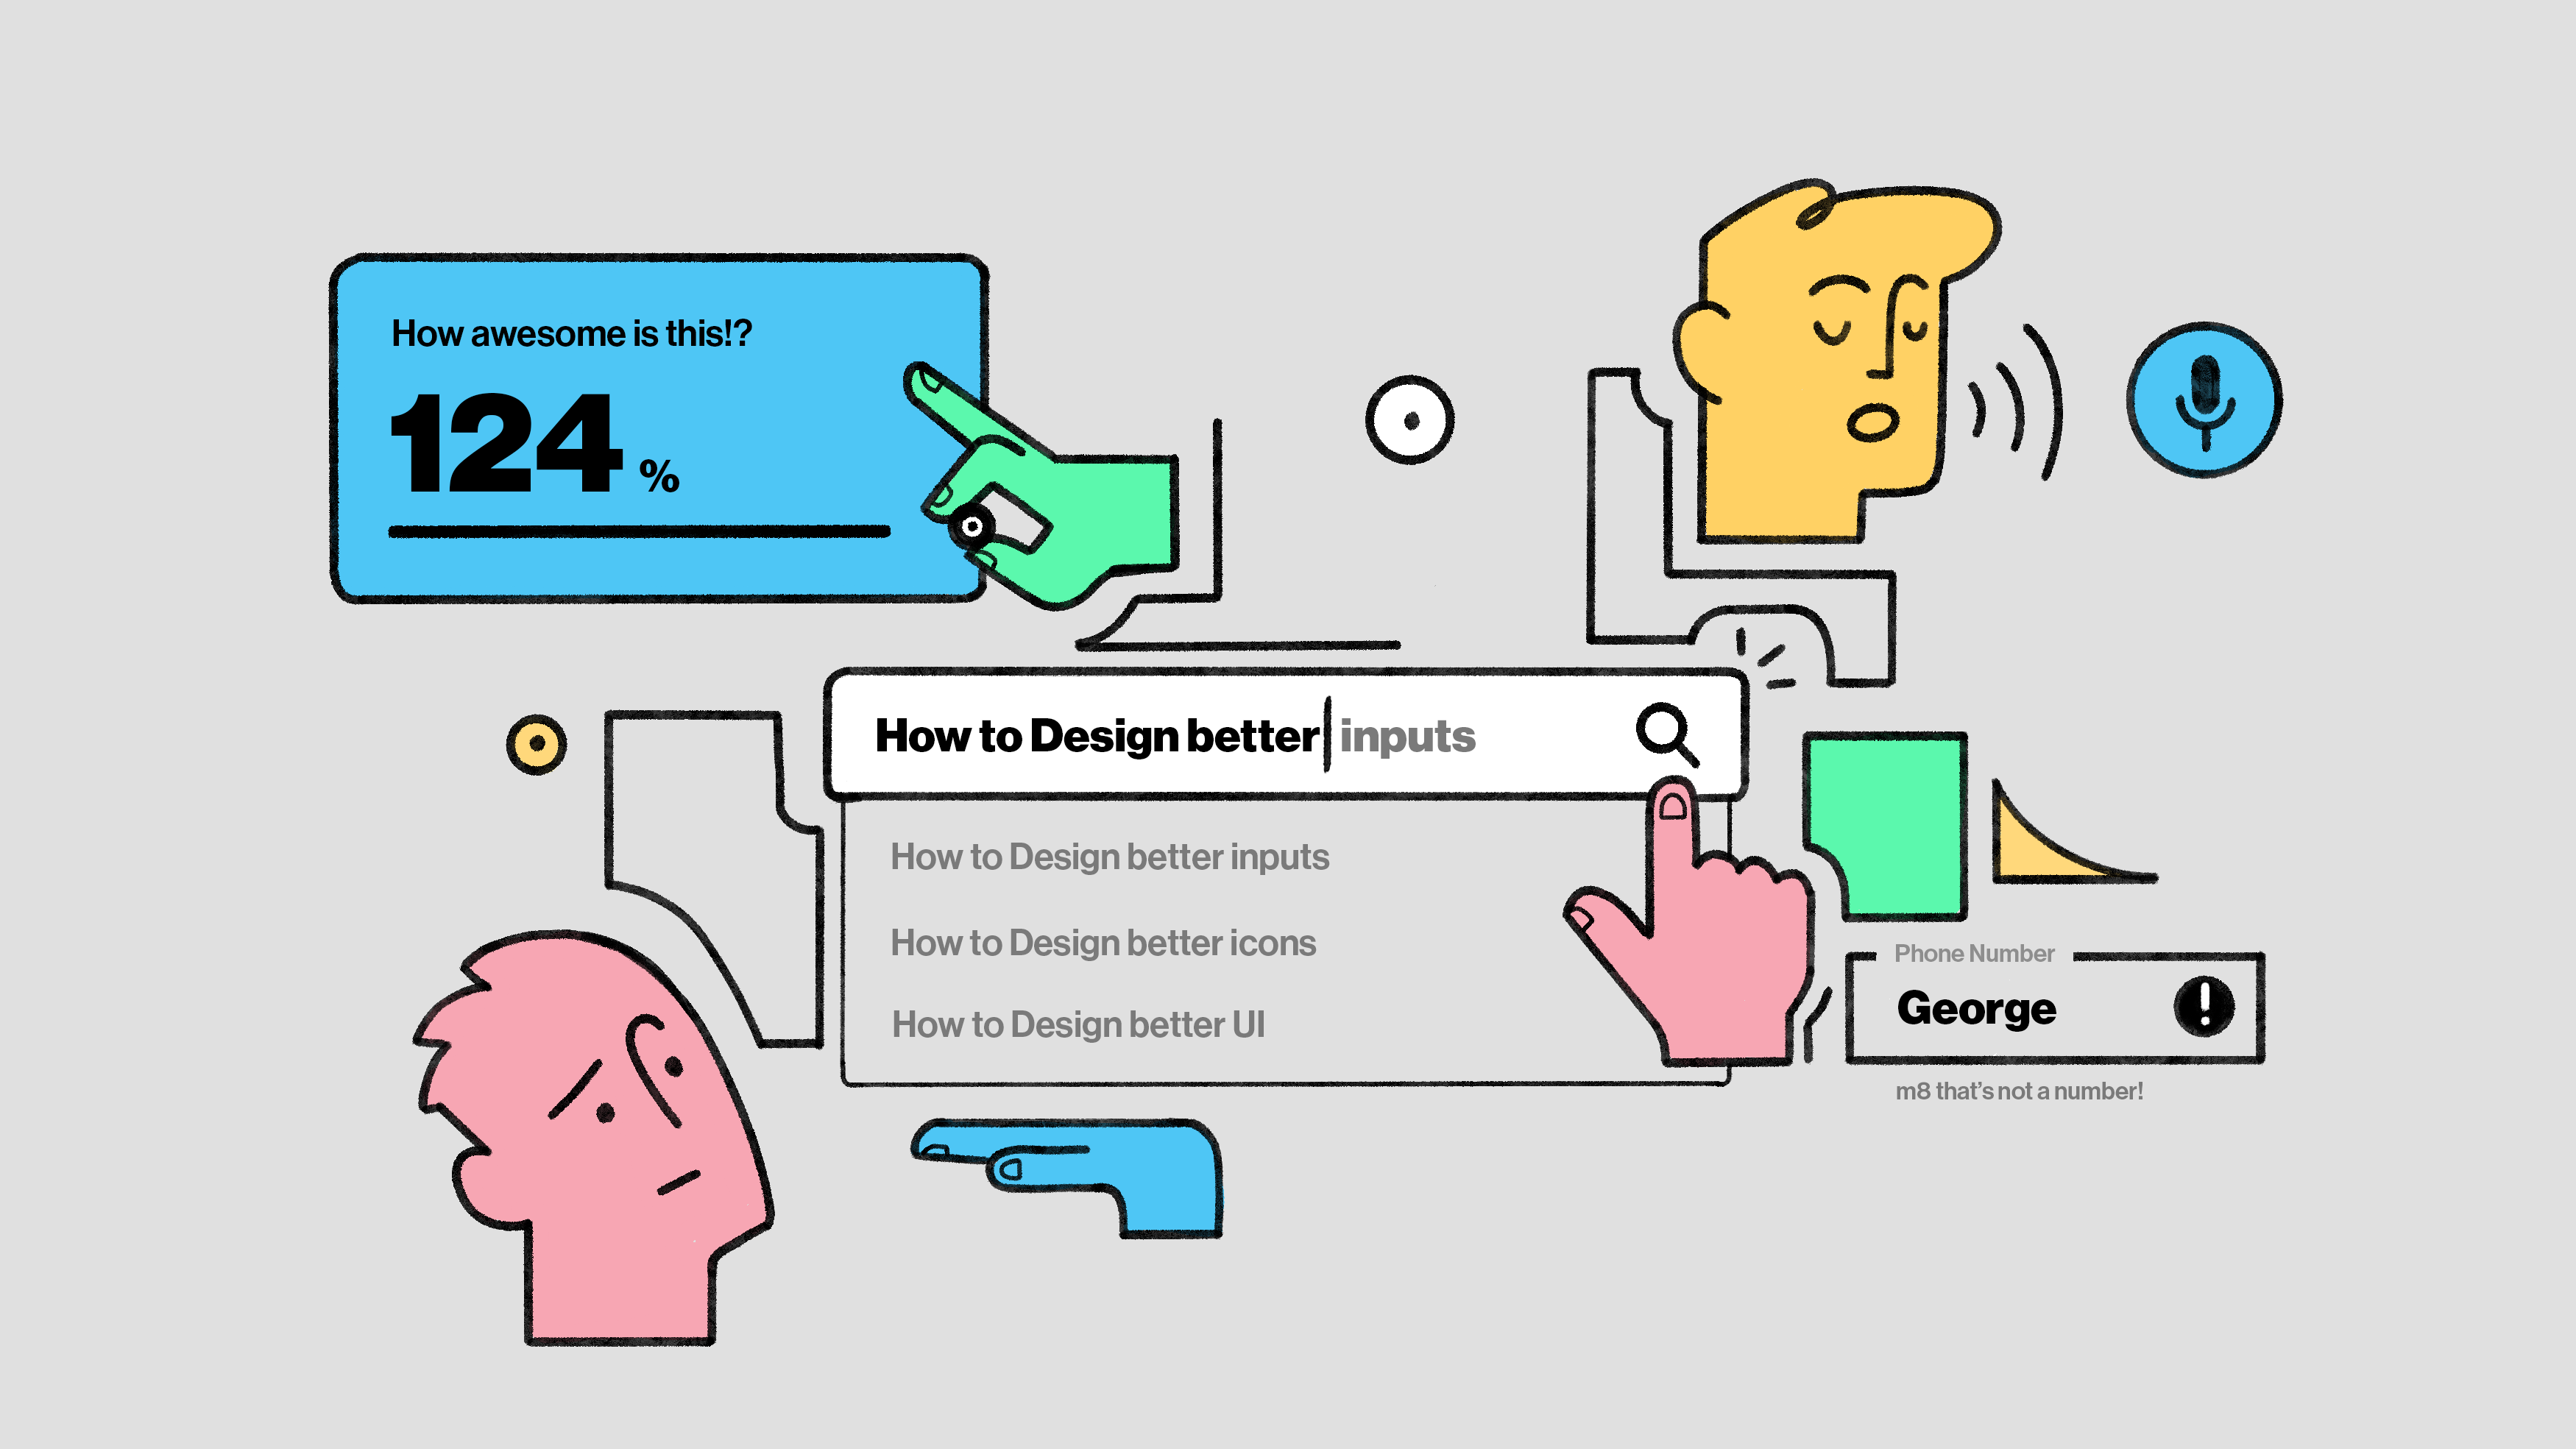 How to design better inputs. A guide for UX and UI designers, by Michał  Jarosz, Appnroll Publication